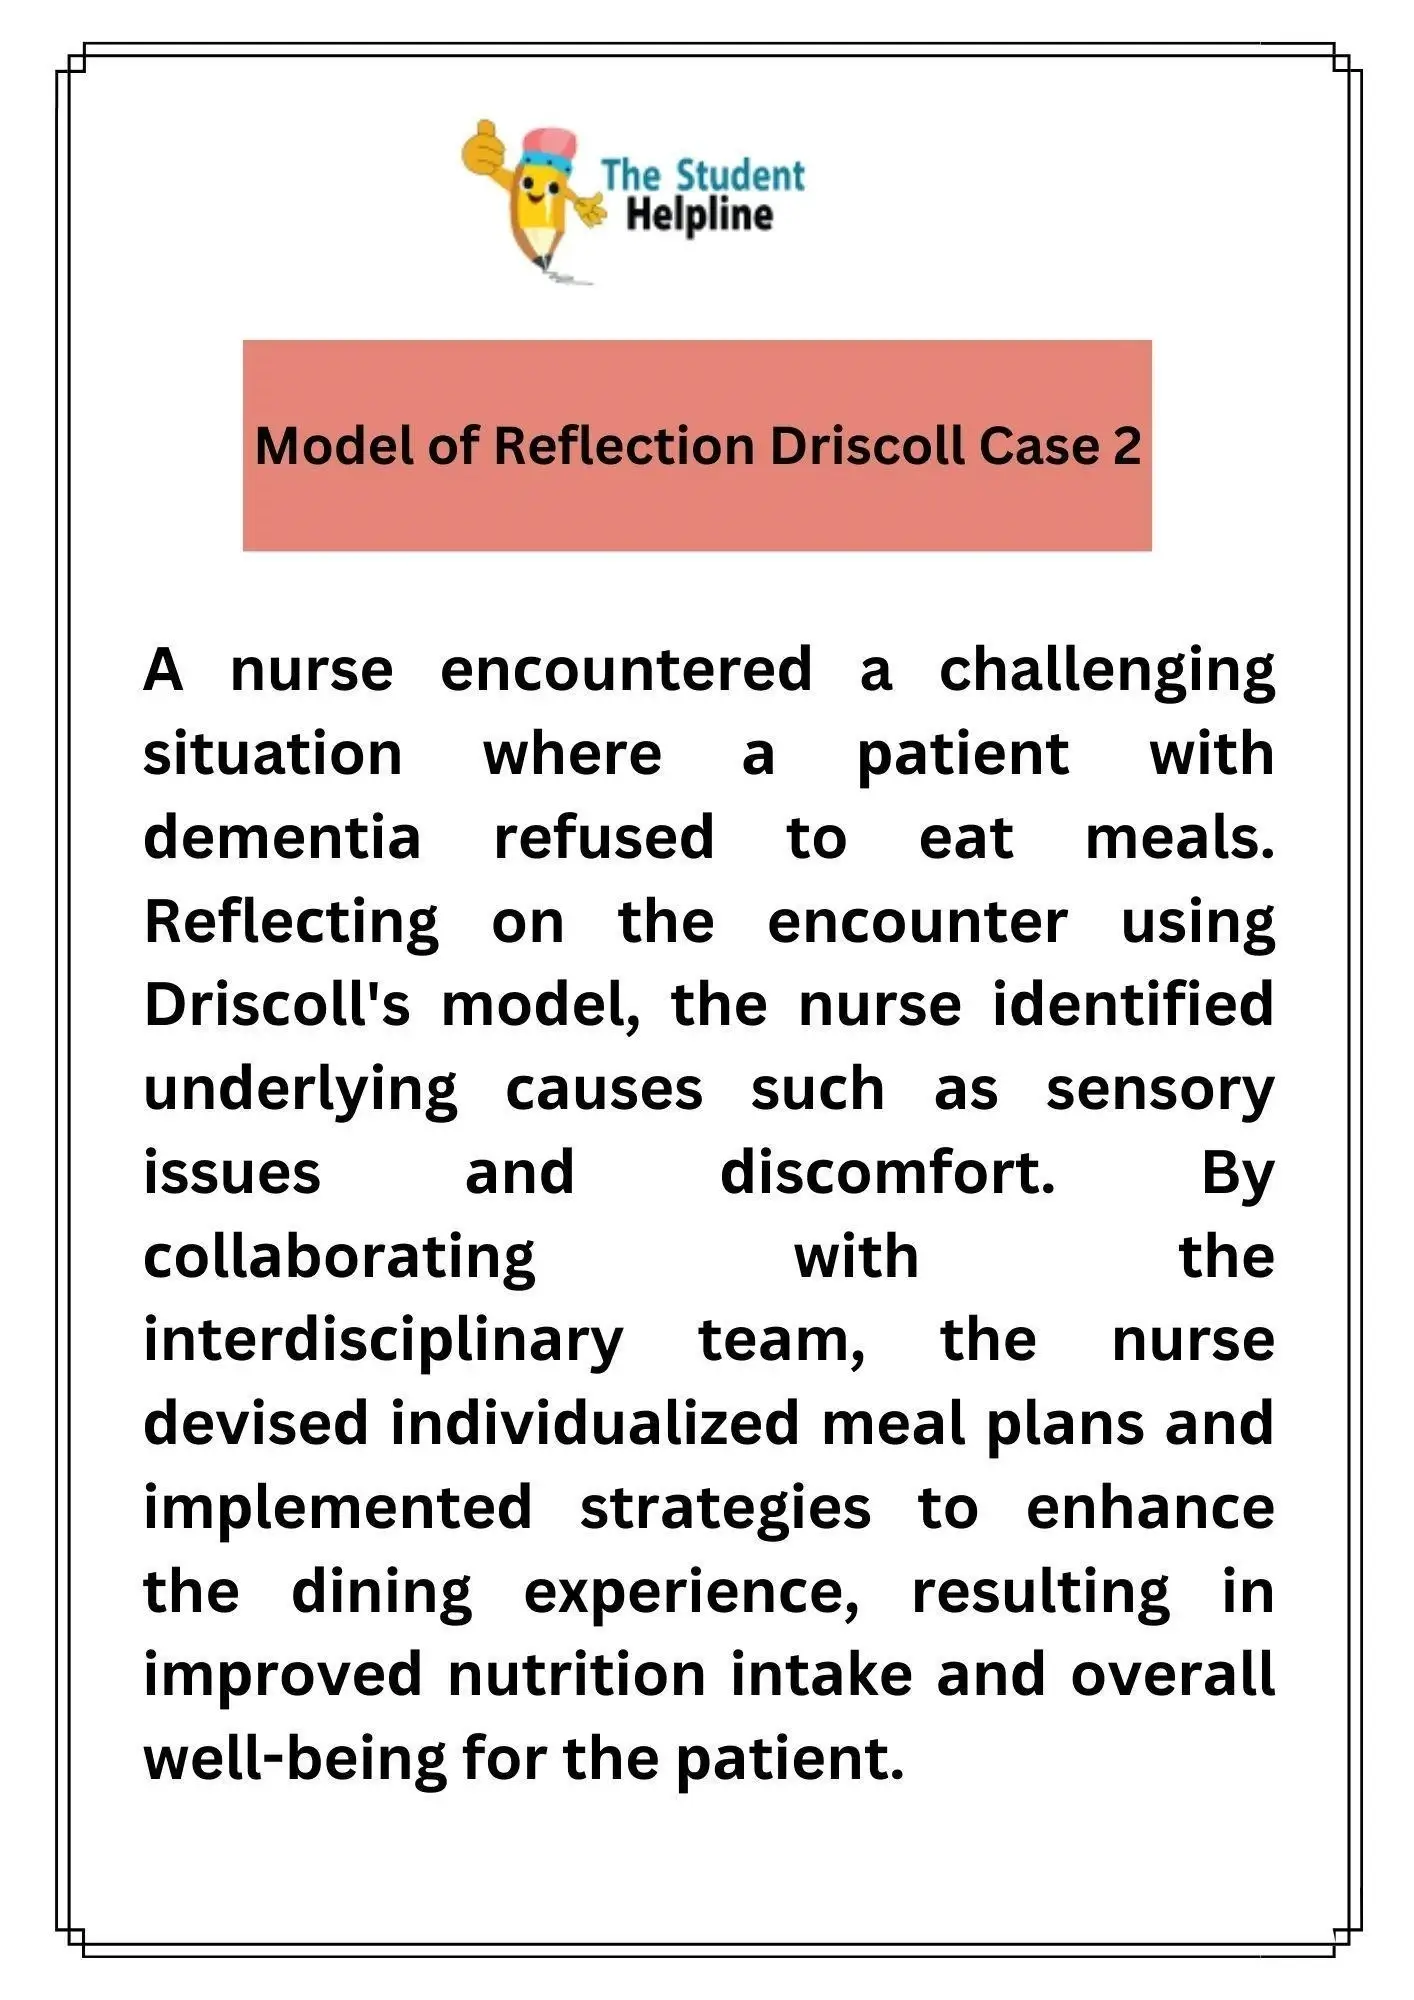 Reference Model of Reflection Driscoll Case 2